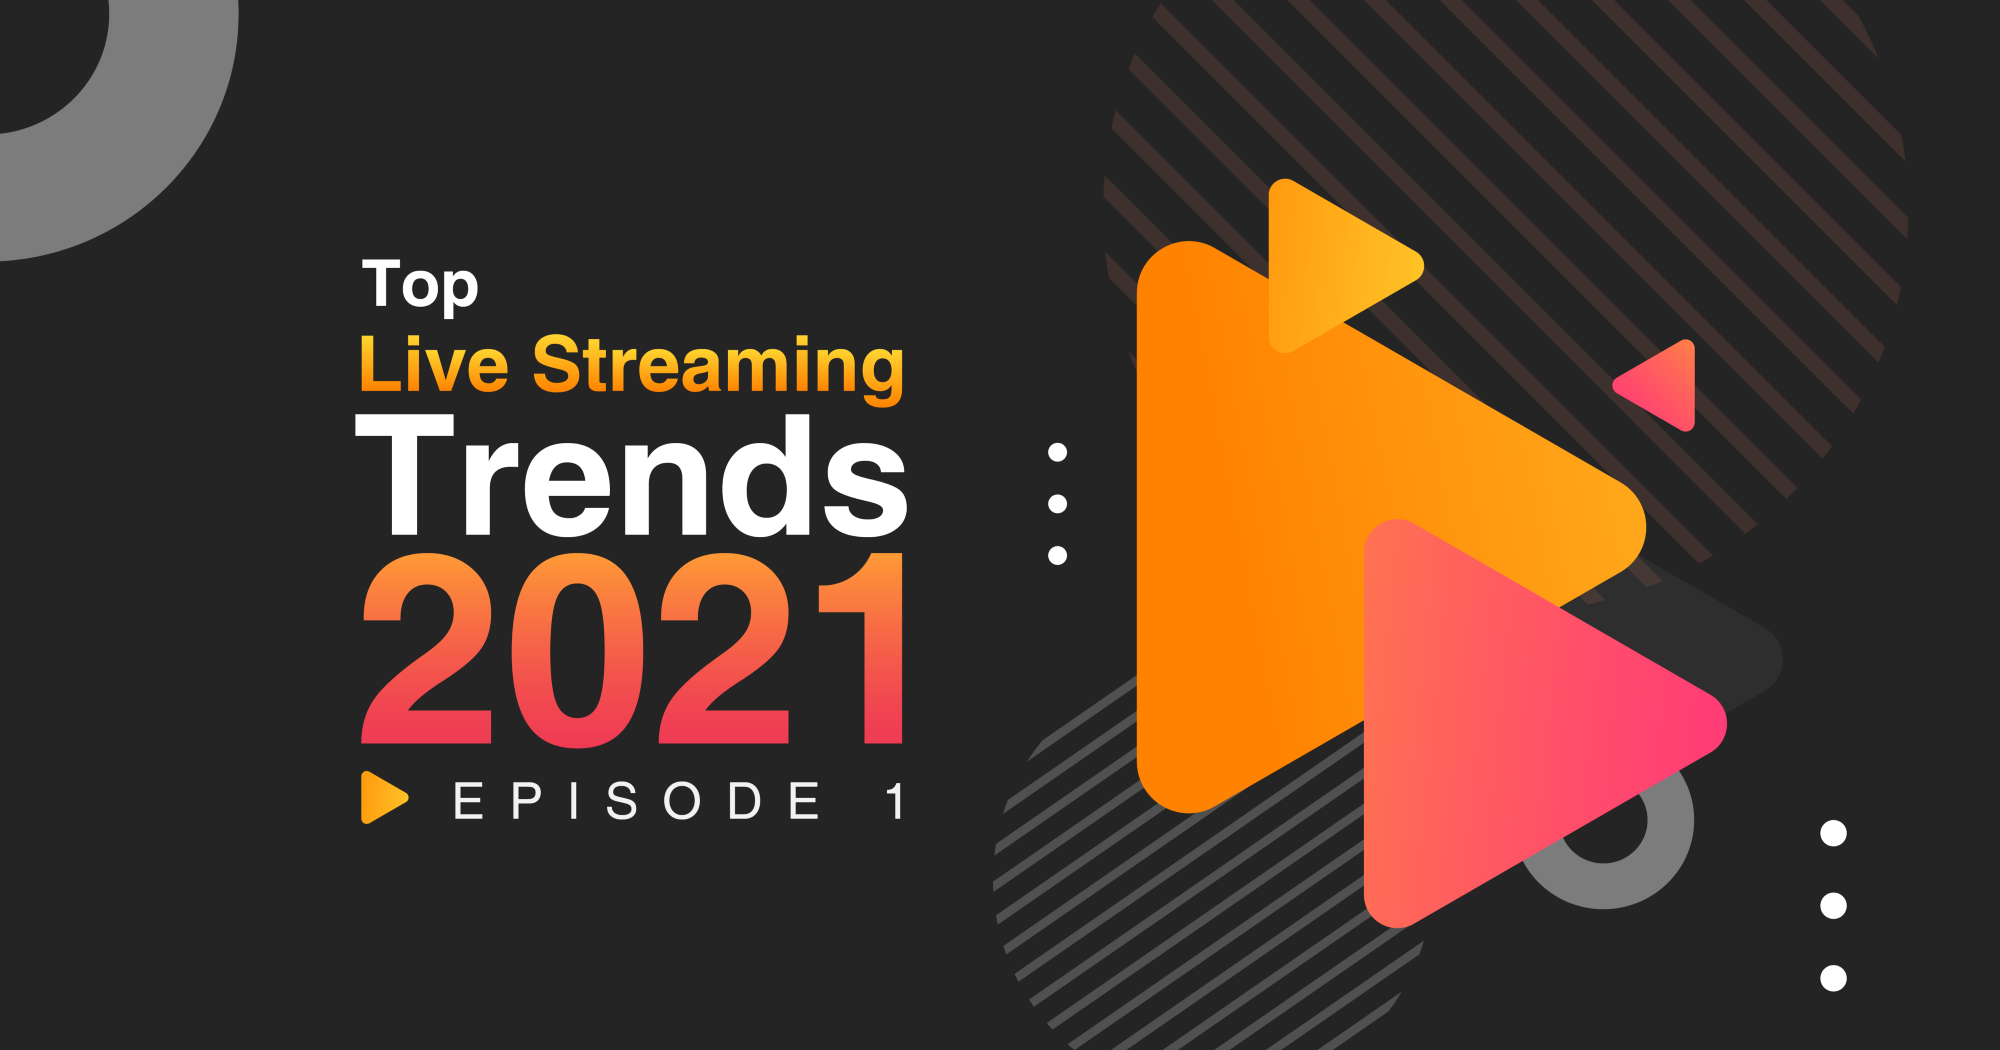 Top Live Streaming Trends to Watch Out for in 2021 — Episode 1